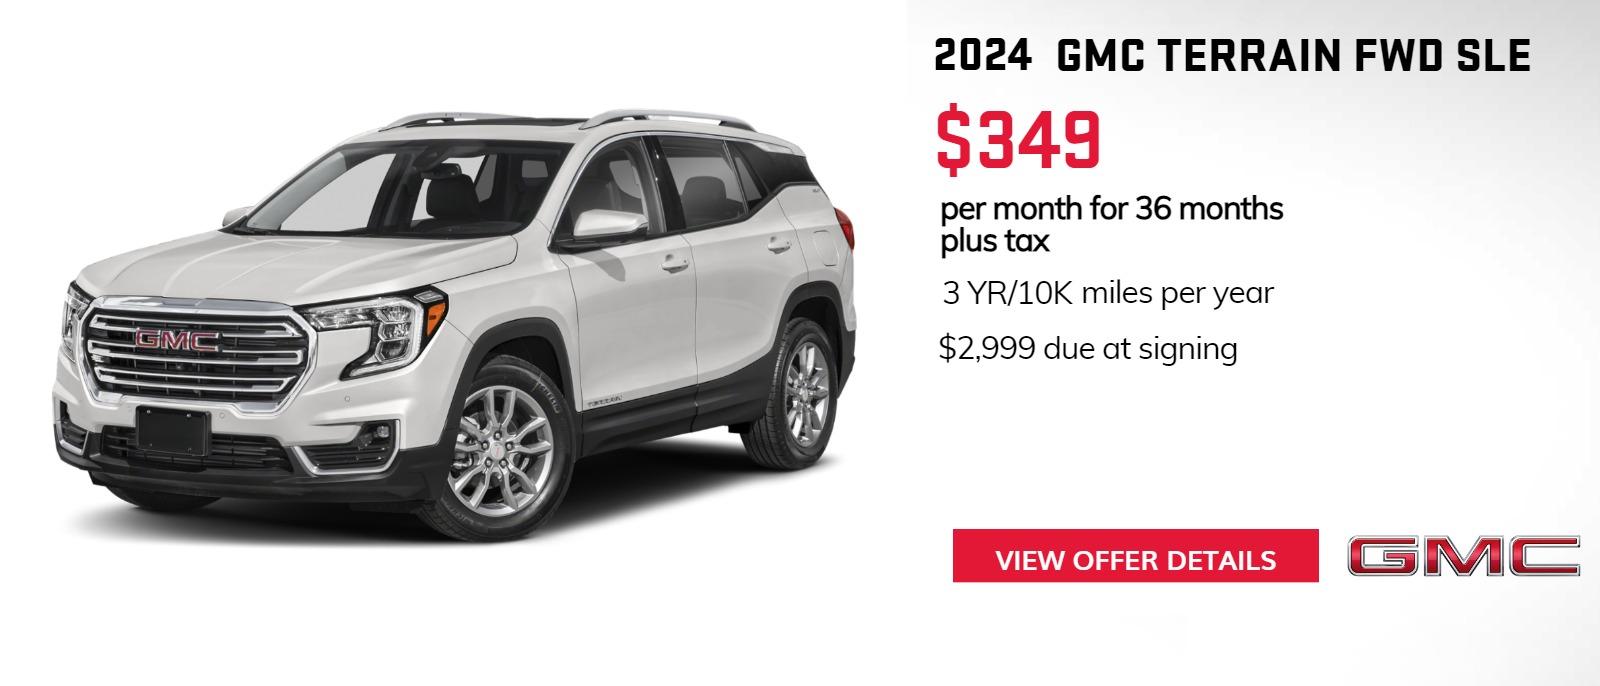 Stock #RL124527 Terrain SLE FWD. 3yr / 10k miles per year $2,999 due at sign $349 per month plus tax.

Disclaimer: Must qualify for GM lease loyalty for the deal.